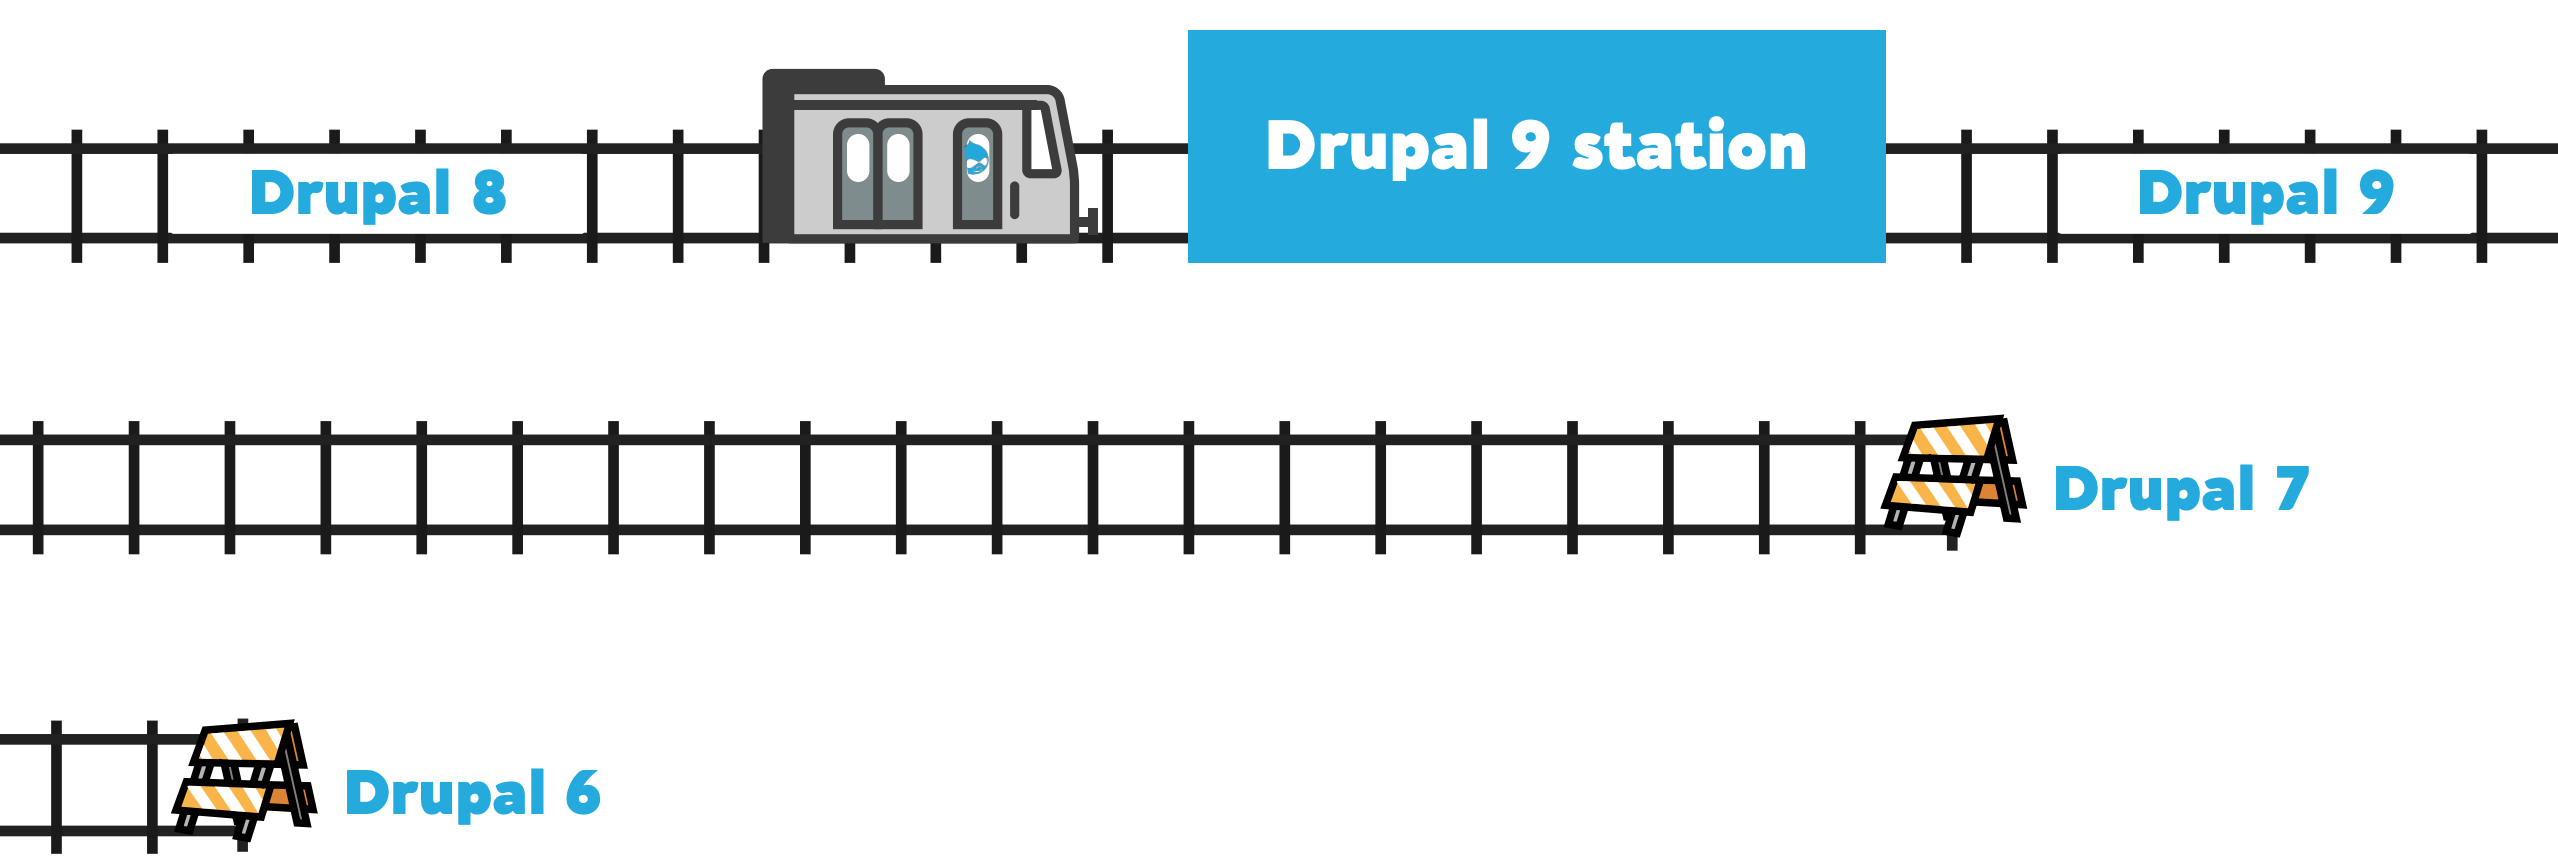 Drupal 8 is not a final stop but just a station on the Drupal development journey